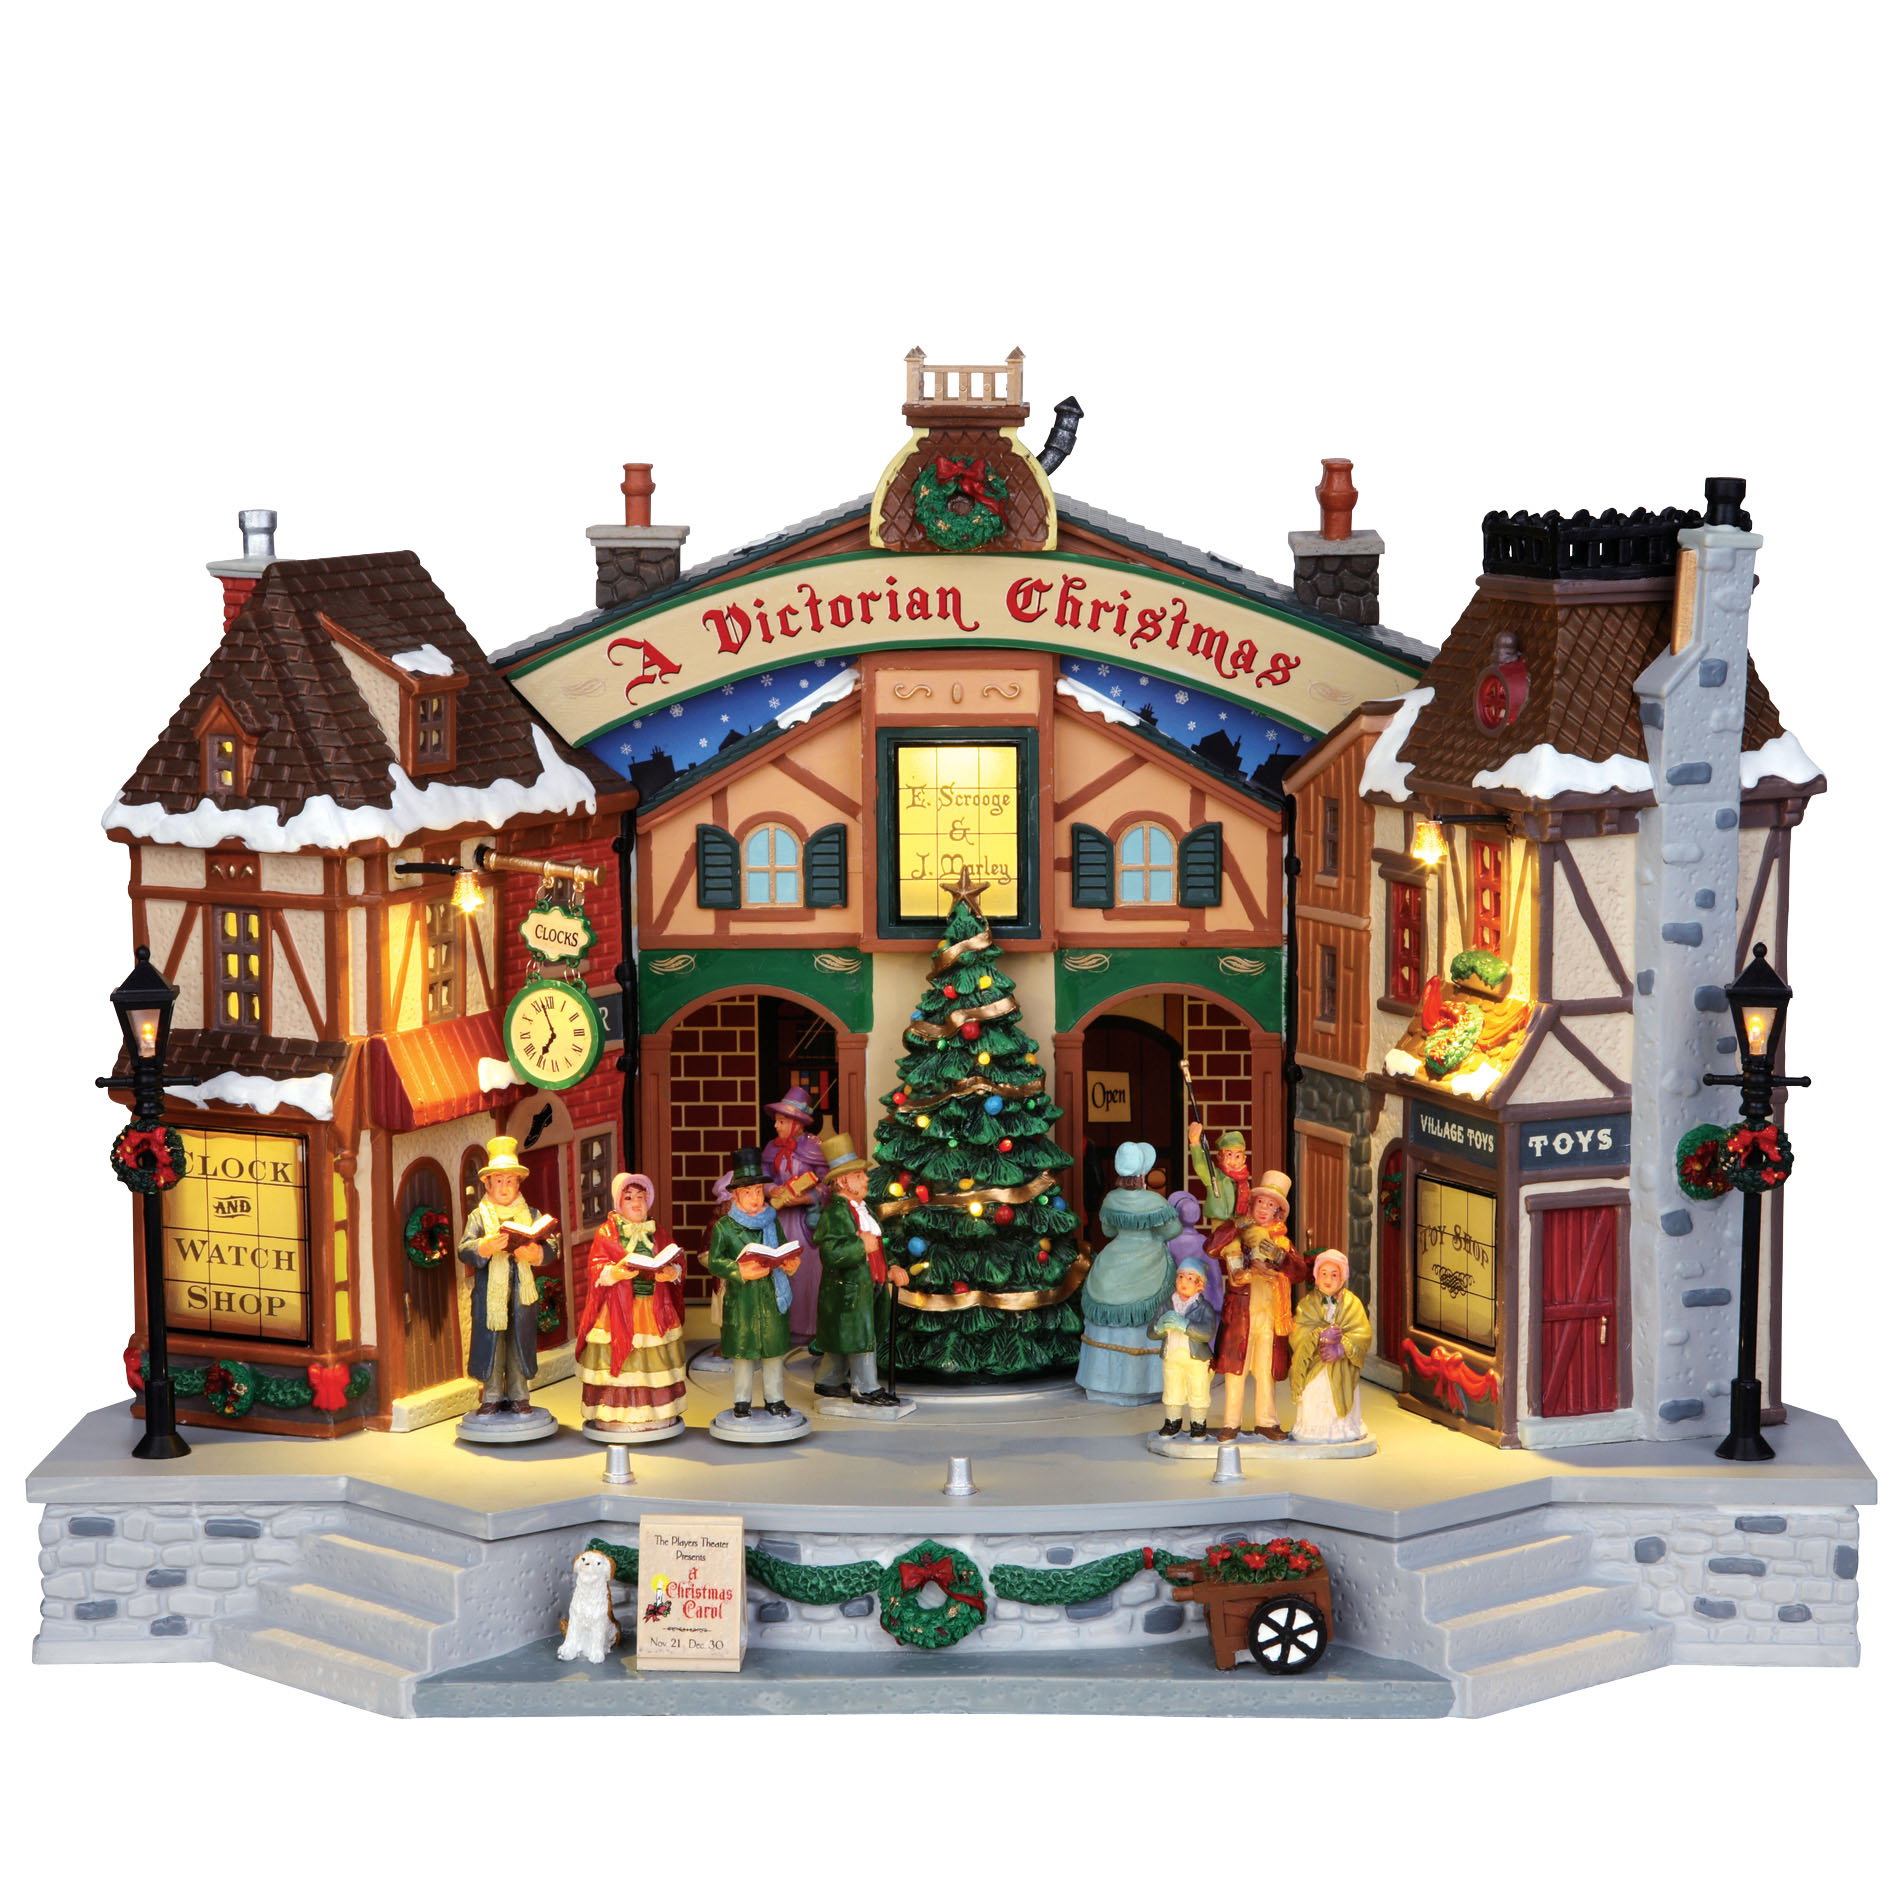 Lemax Village Collection Christmas Village Building, A Christmas Carol Play, With 4.5V Adaptor